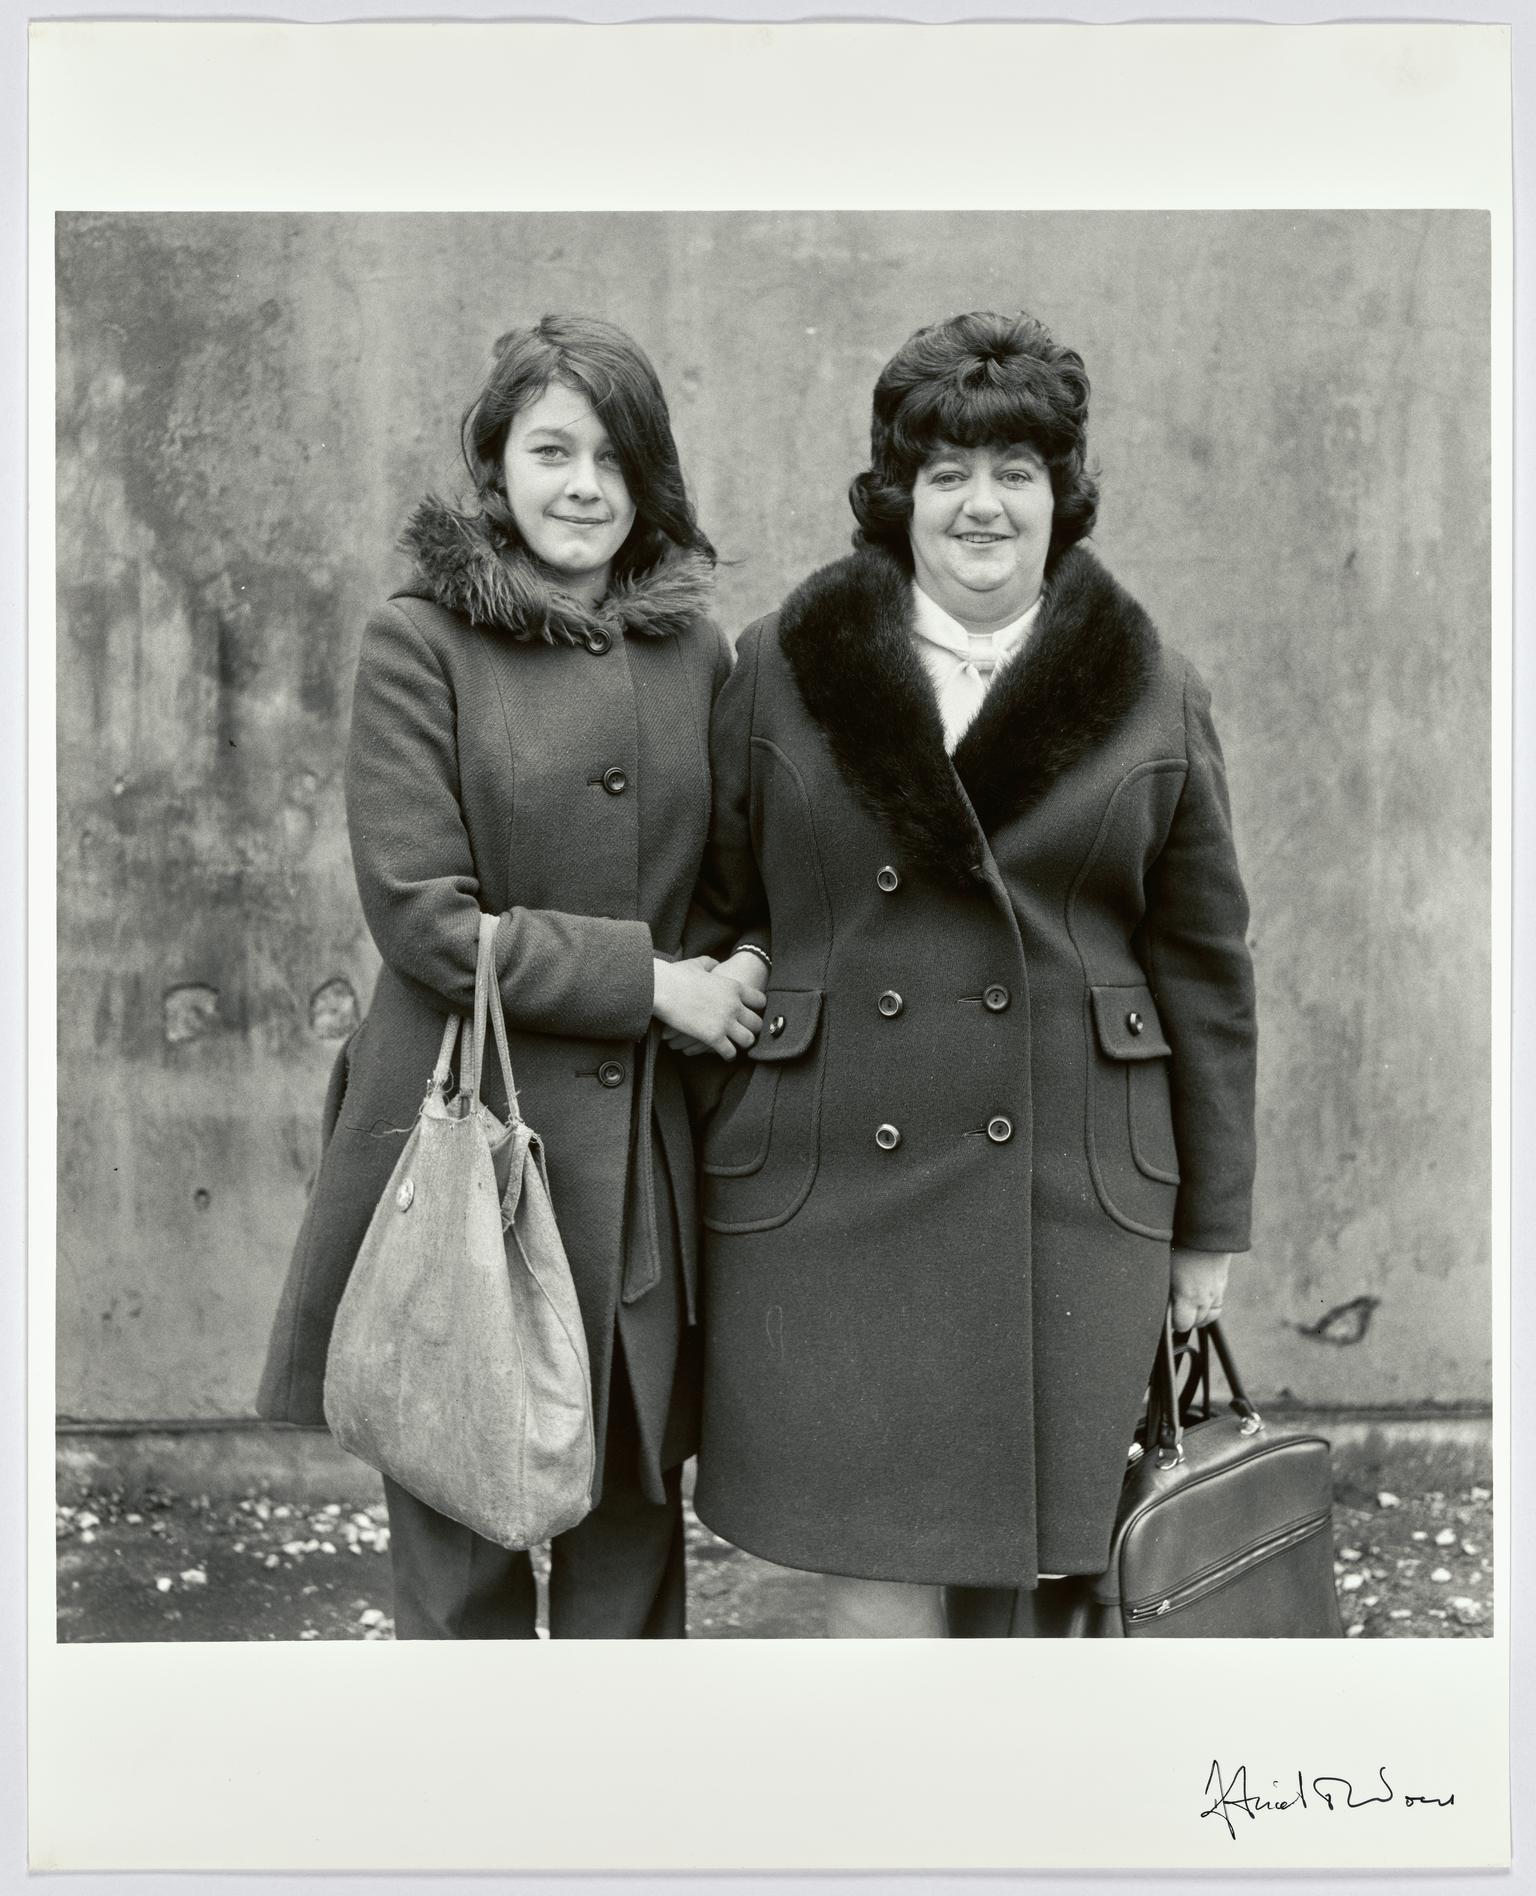 Karen Cubin and Barbara Taylor, daughter and mother, from Barrow-in-Furness